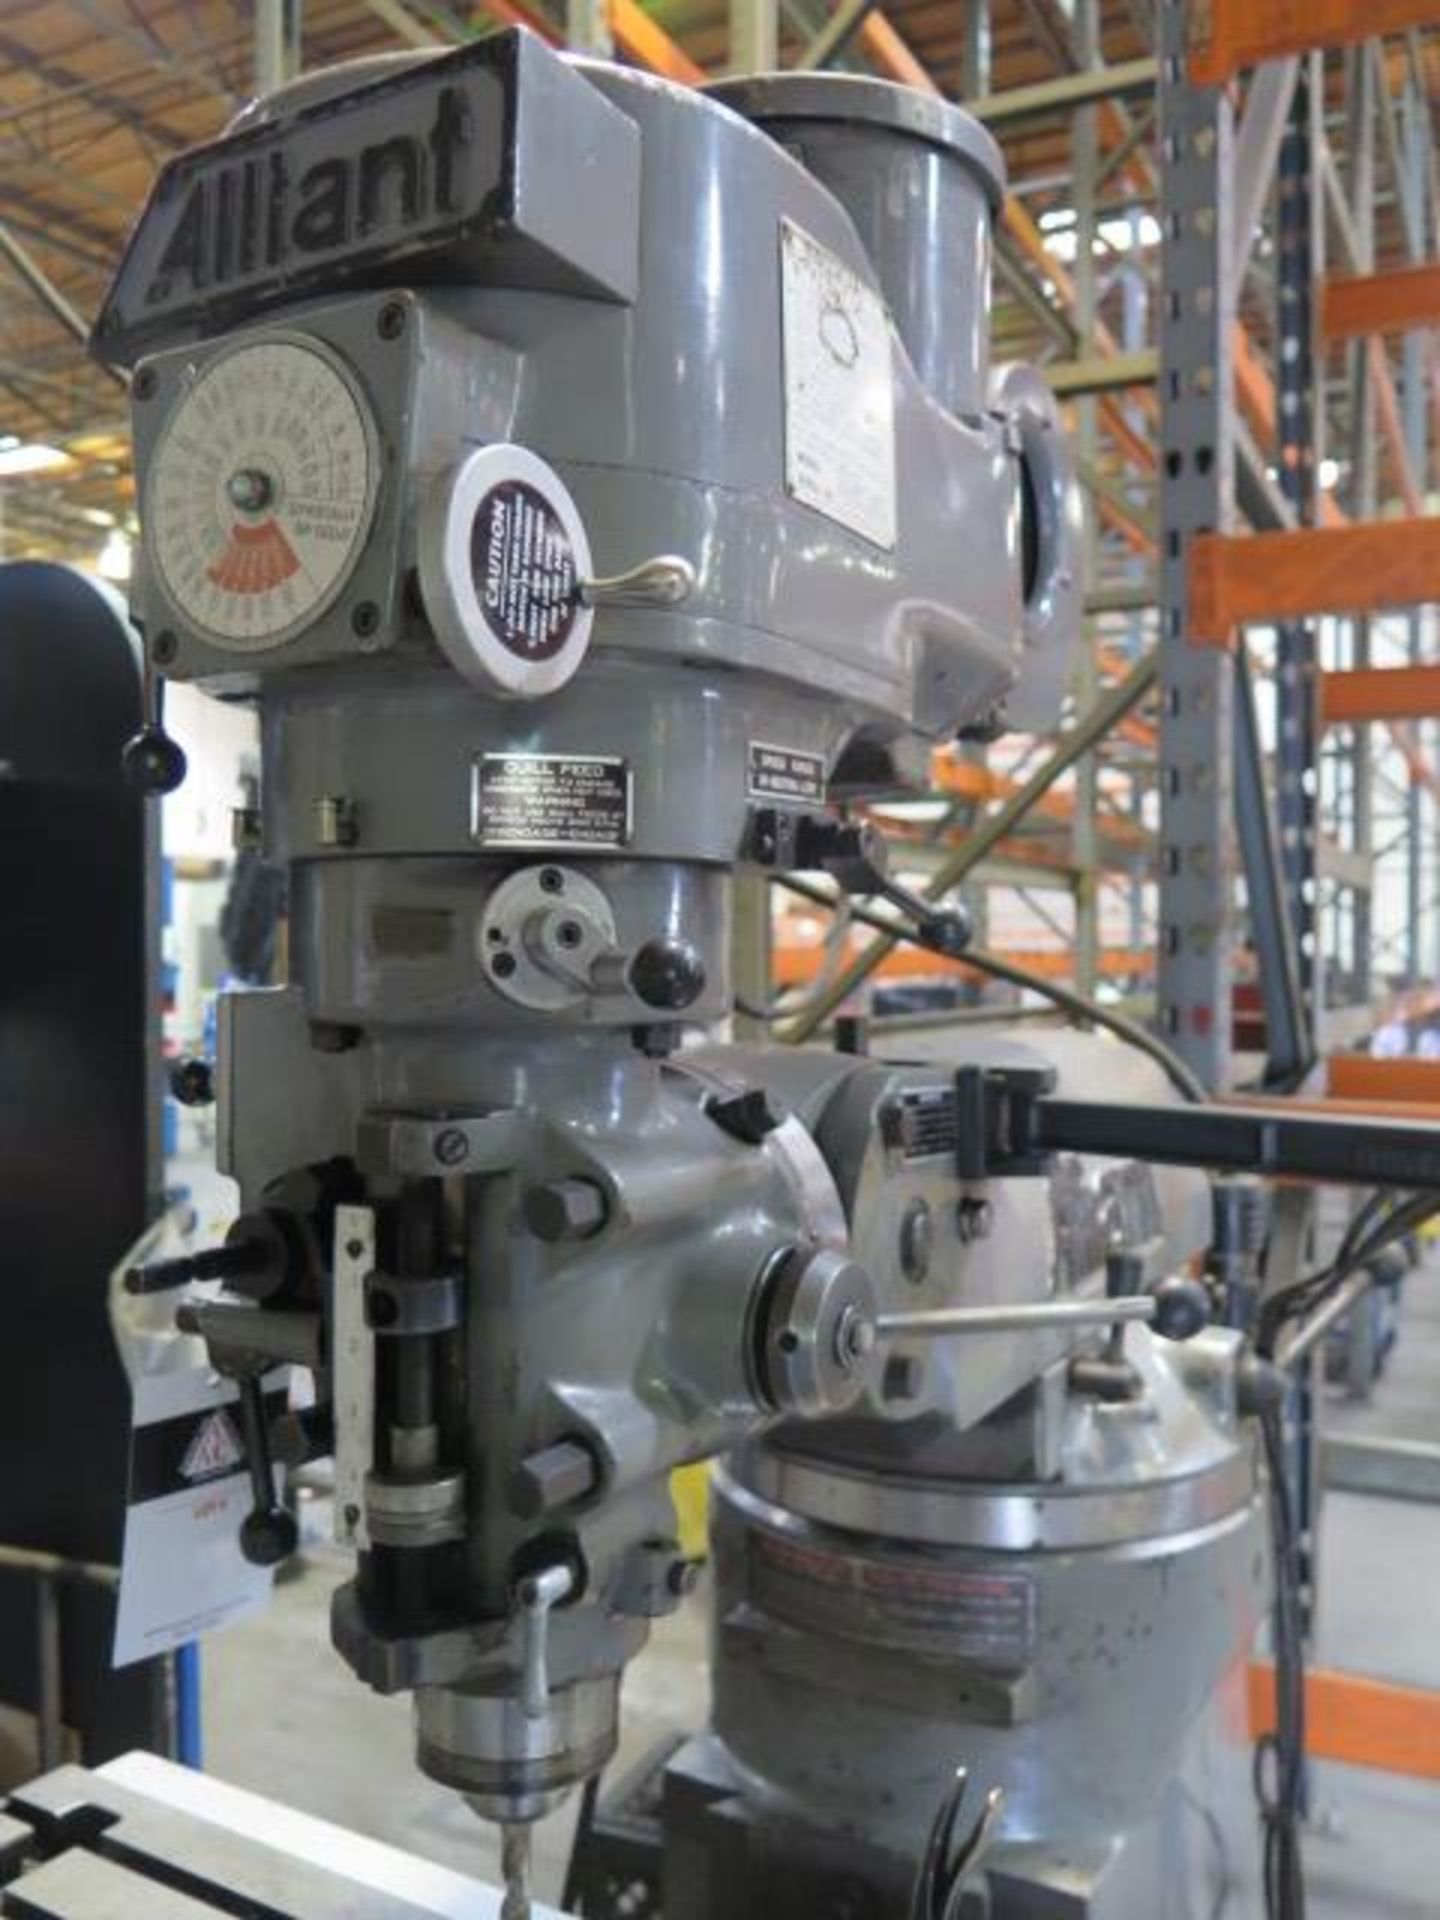 Alliant Vertical Mill s/n 61210241 w/ DRO, 2Hp Motor,60-4500 Dial Change RPM, Chrome ways,SOLD AS IS - Image 6 of 16